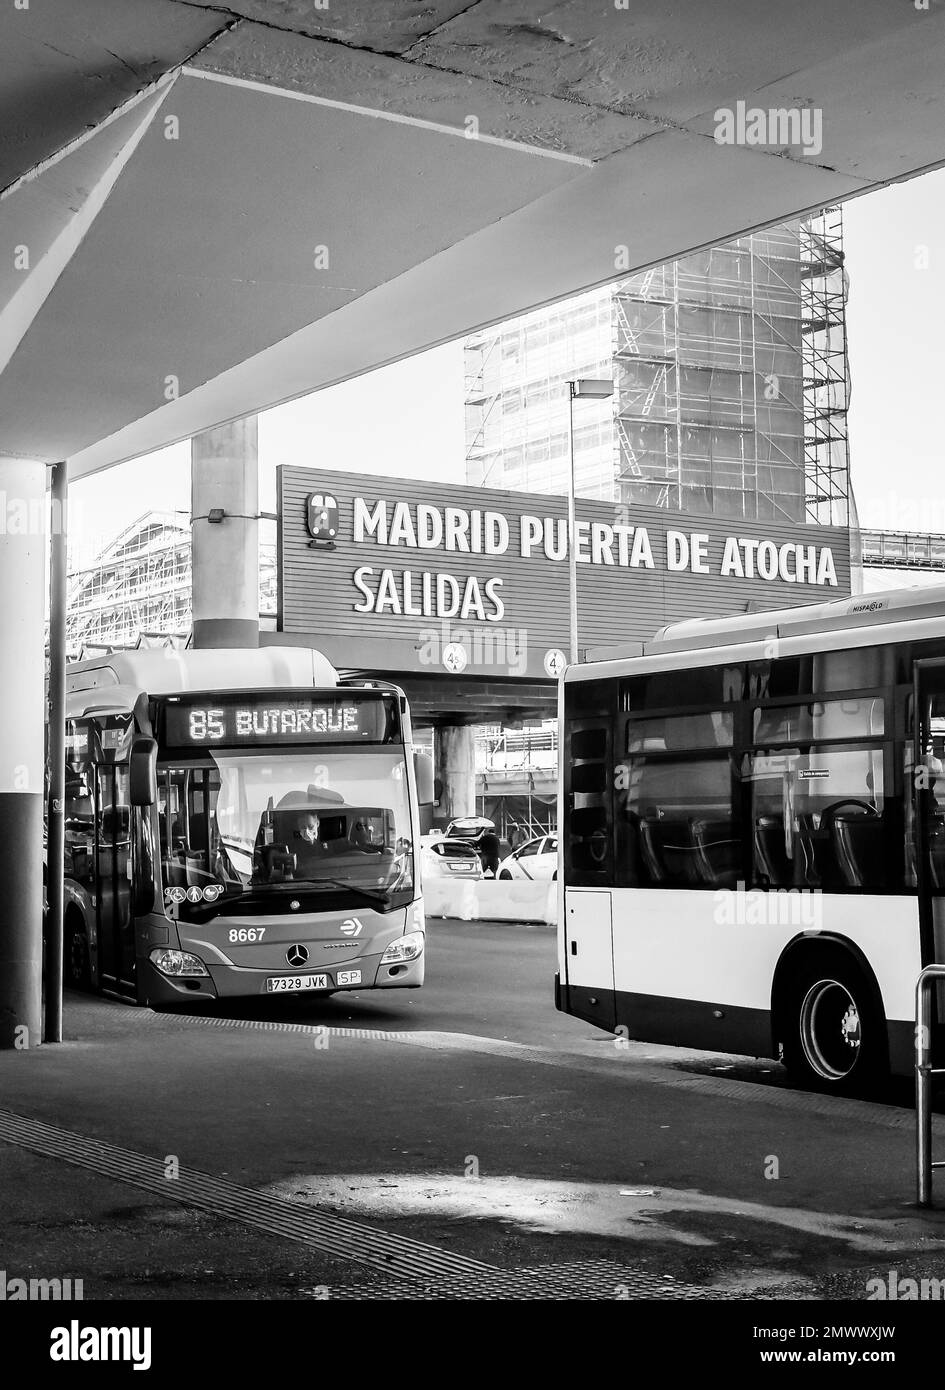 An EMT blue bus and airport bus outside Atocha railway station that has just arrived at the end of the journey from the airport. Stock Photo